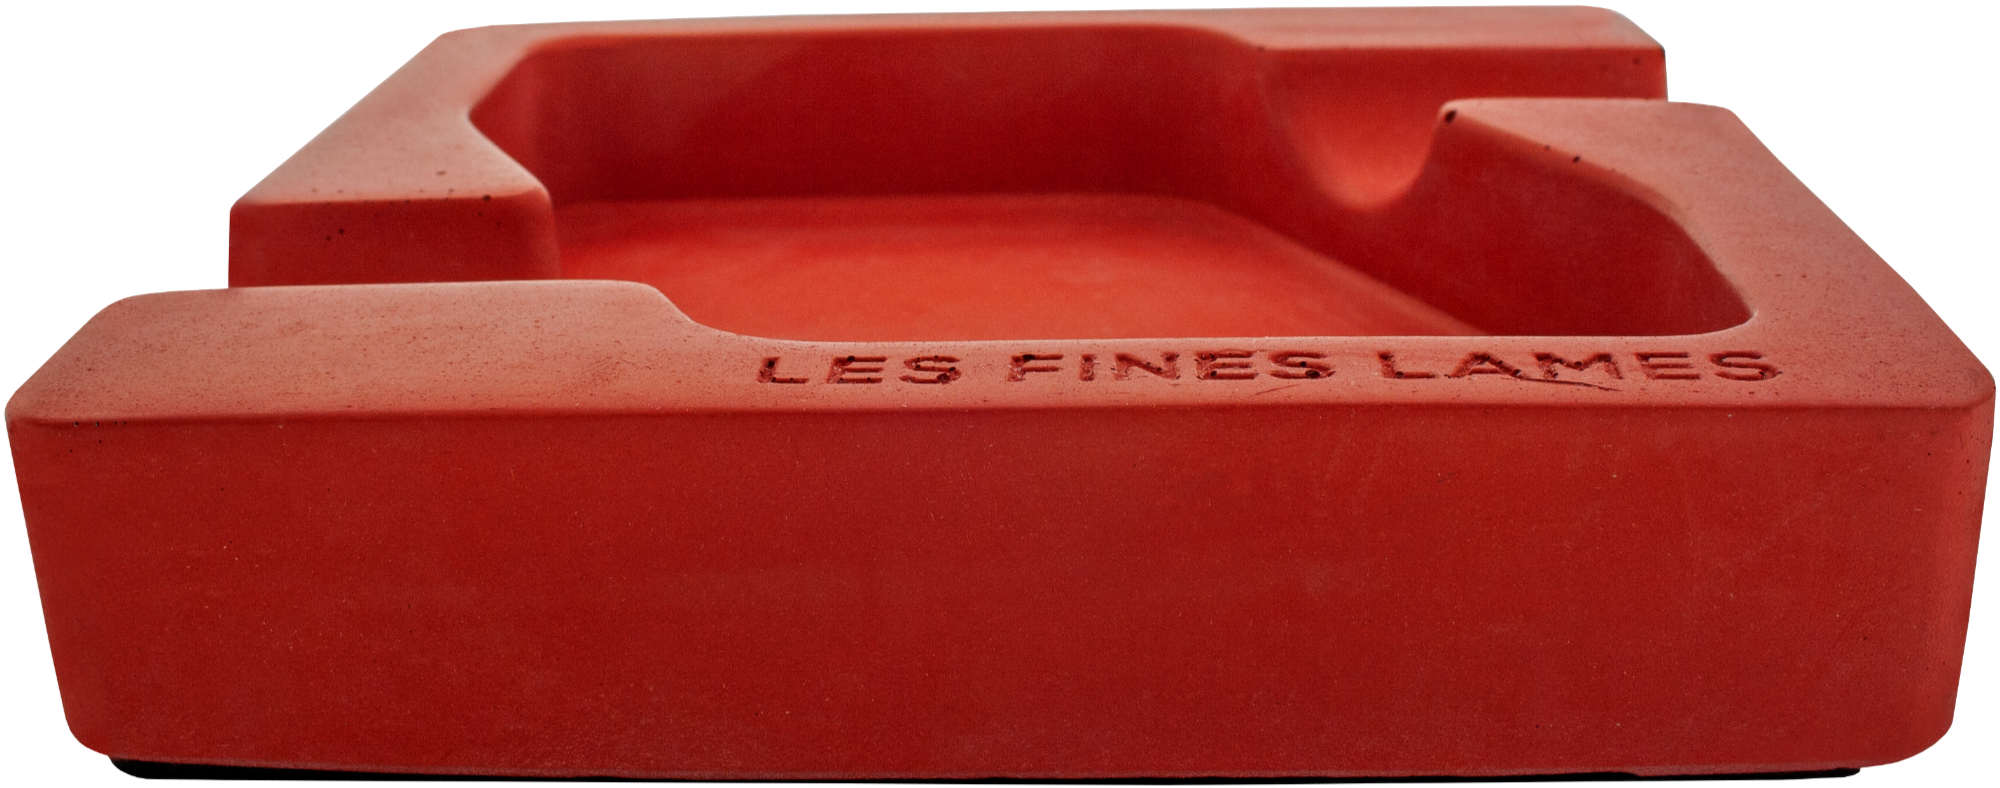 Les Fines Lames Dyad Ashtray Red